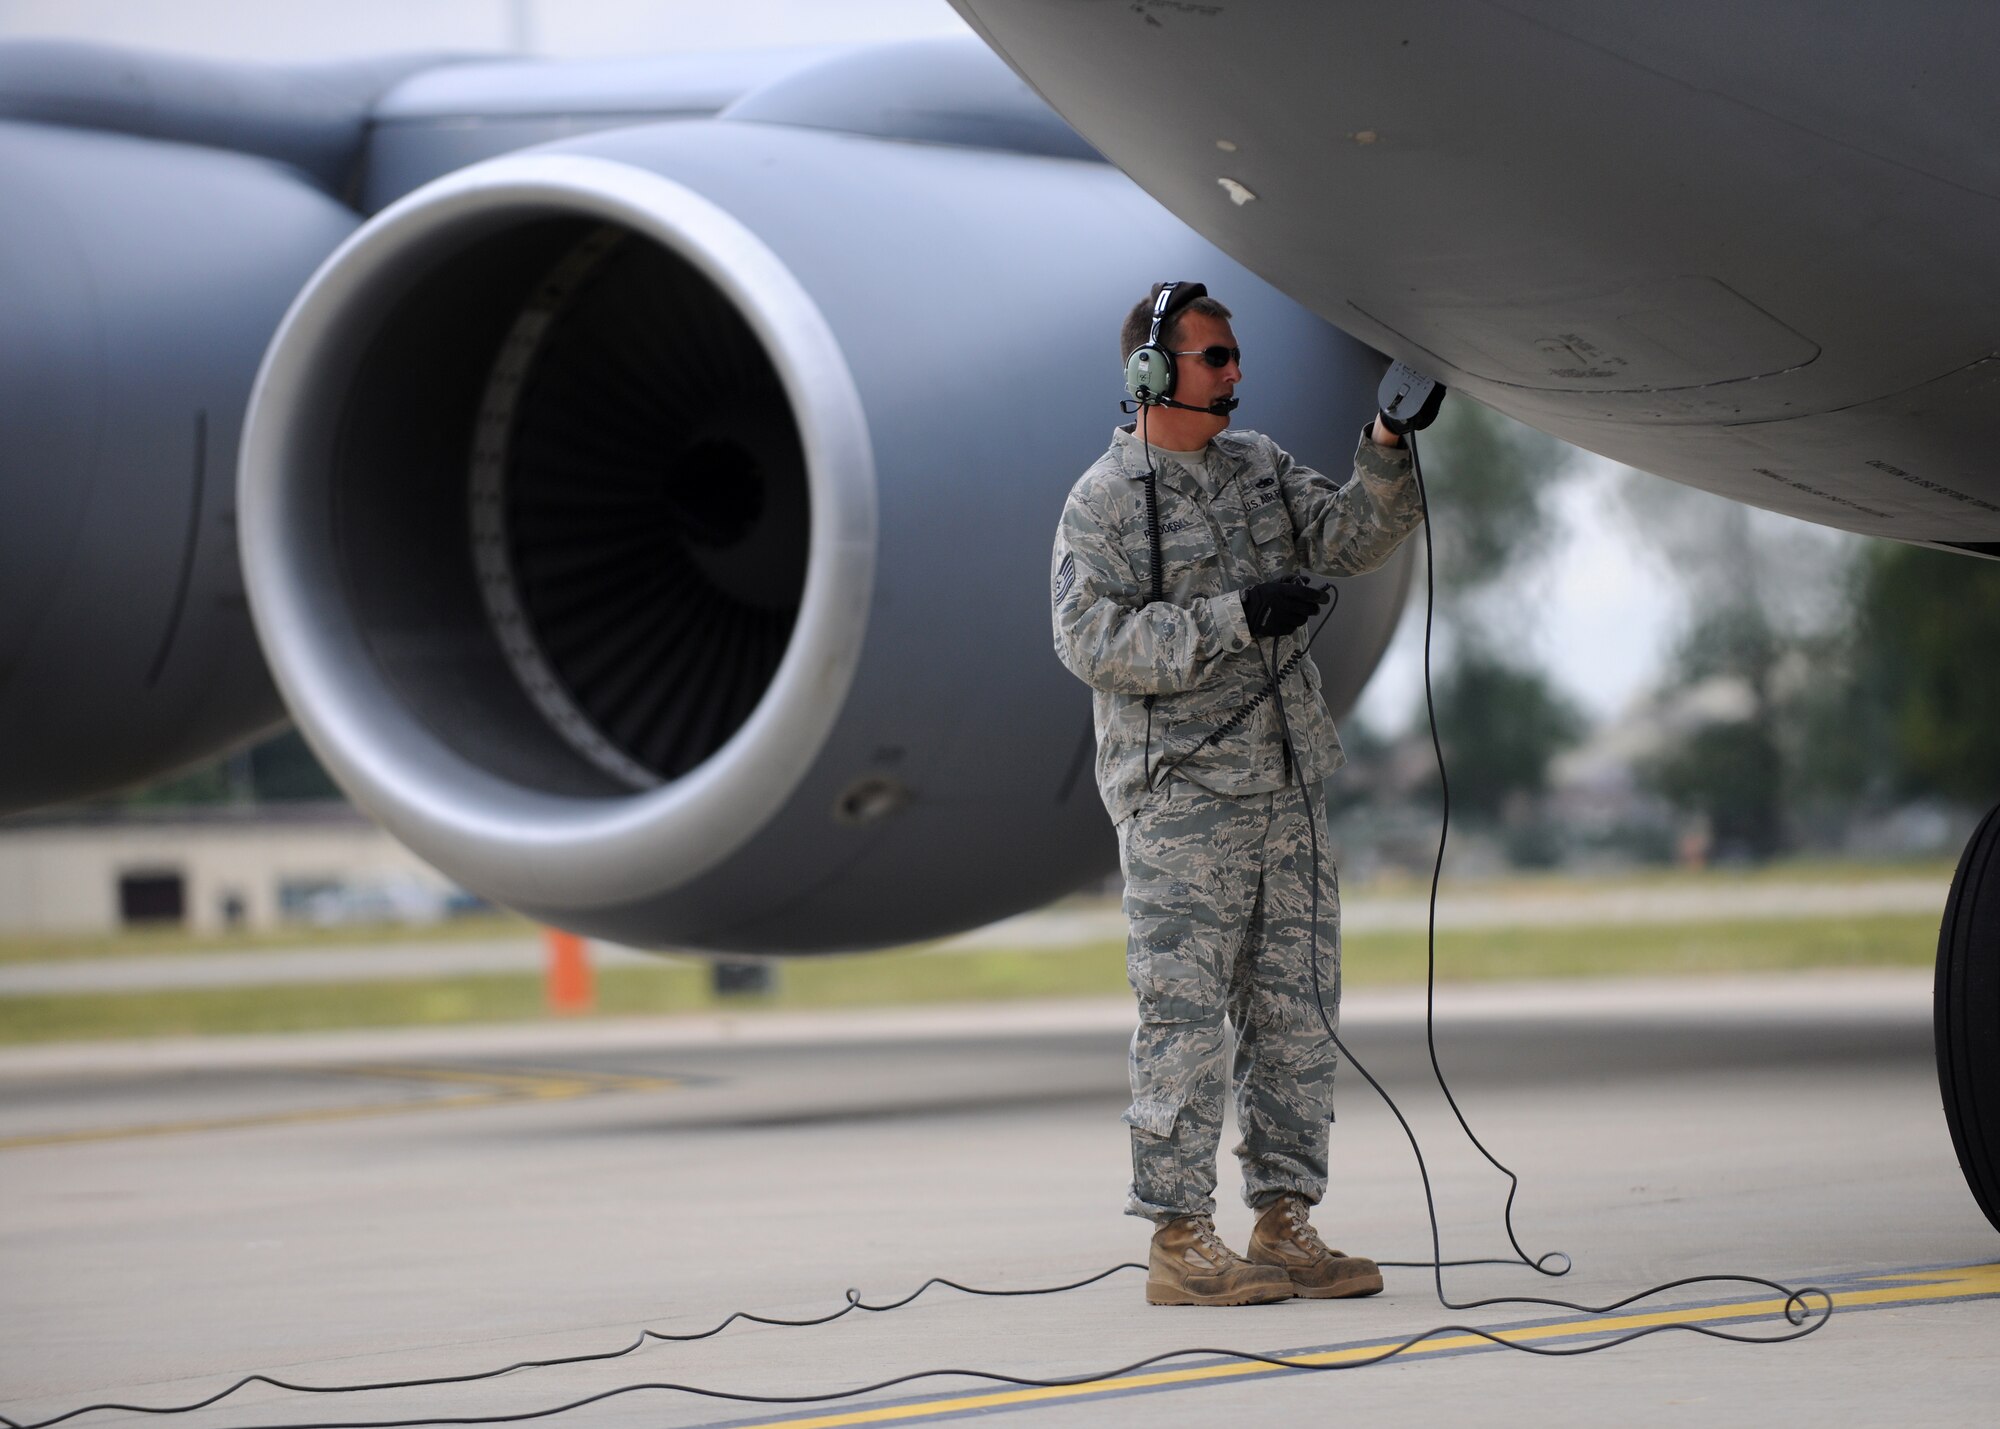 RAF MILDENHALL, England – Tech. Sgt. Ray Rhodes, 100th Aircraft Maintenance Squadron flying crew chief, disconnects communications during launch procedures in support of the Allied Strike exercise Aug. 5. Allied Strike is Europe’s premier annual close air support exercise that helps build partnership capacity among allied NATO nations and joint services. (U.S. Air Force photo/ Staff Sgt. Jerry Fleshman)